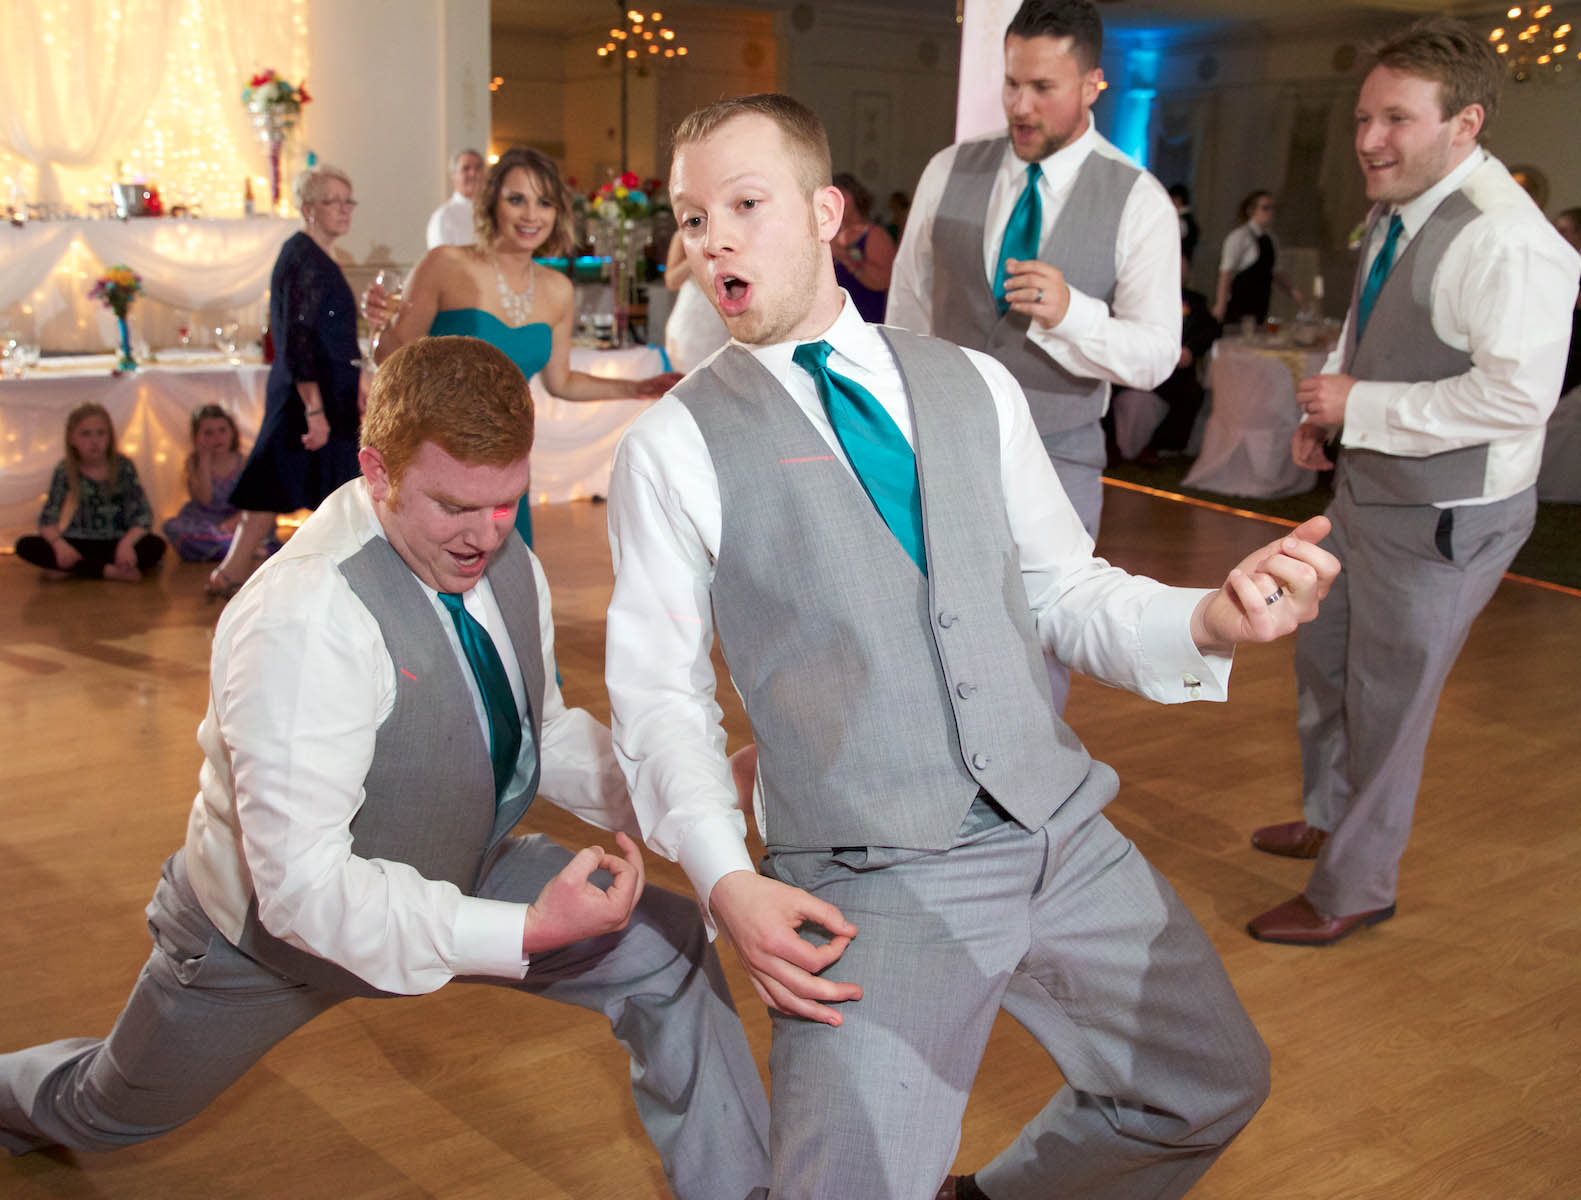 Ben had former band mates as groomsmen and guests. Wedding pictures by Tiffany & Steve of Warmowski Photography.